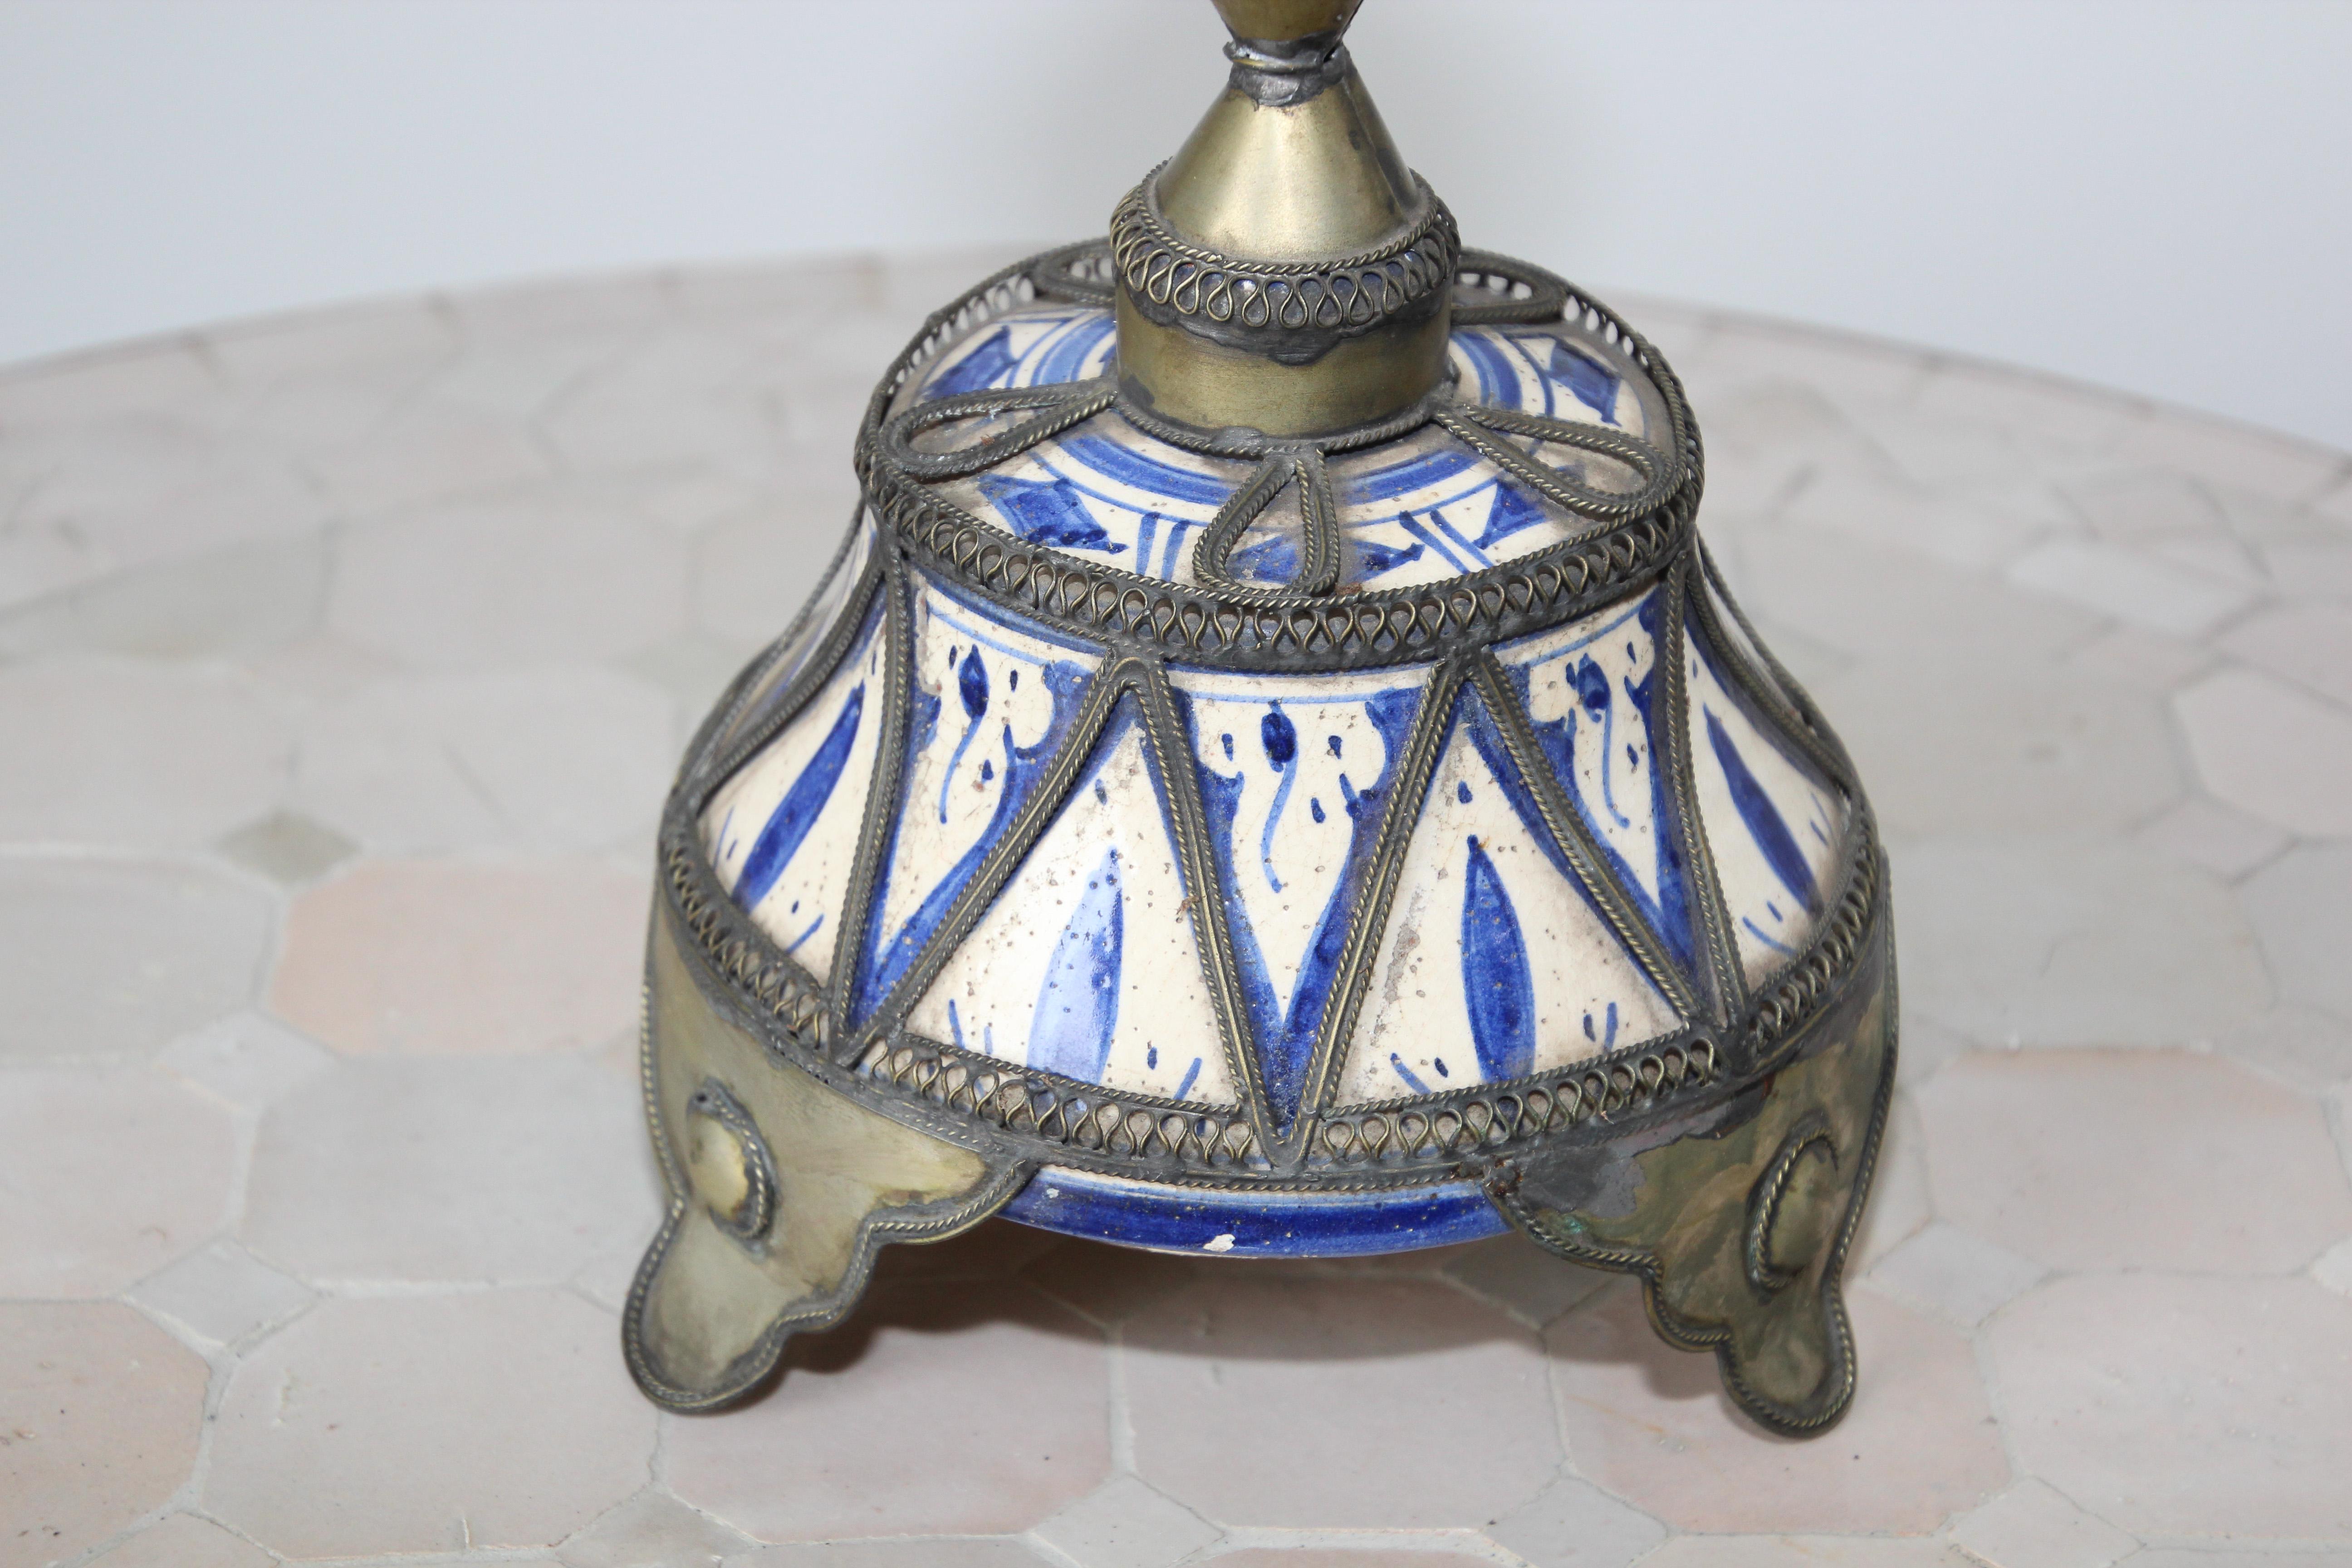 Moorish Moroccan Ceramic Candles Holder from Fez with Silver Filigree